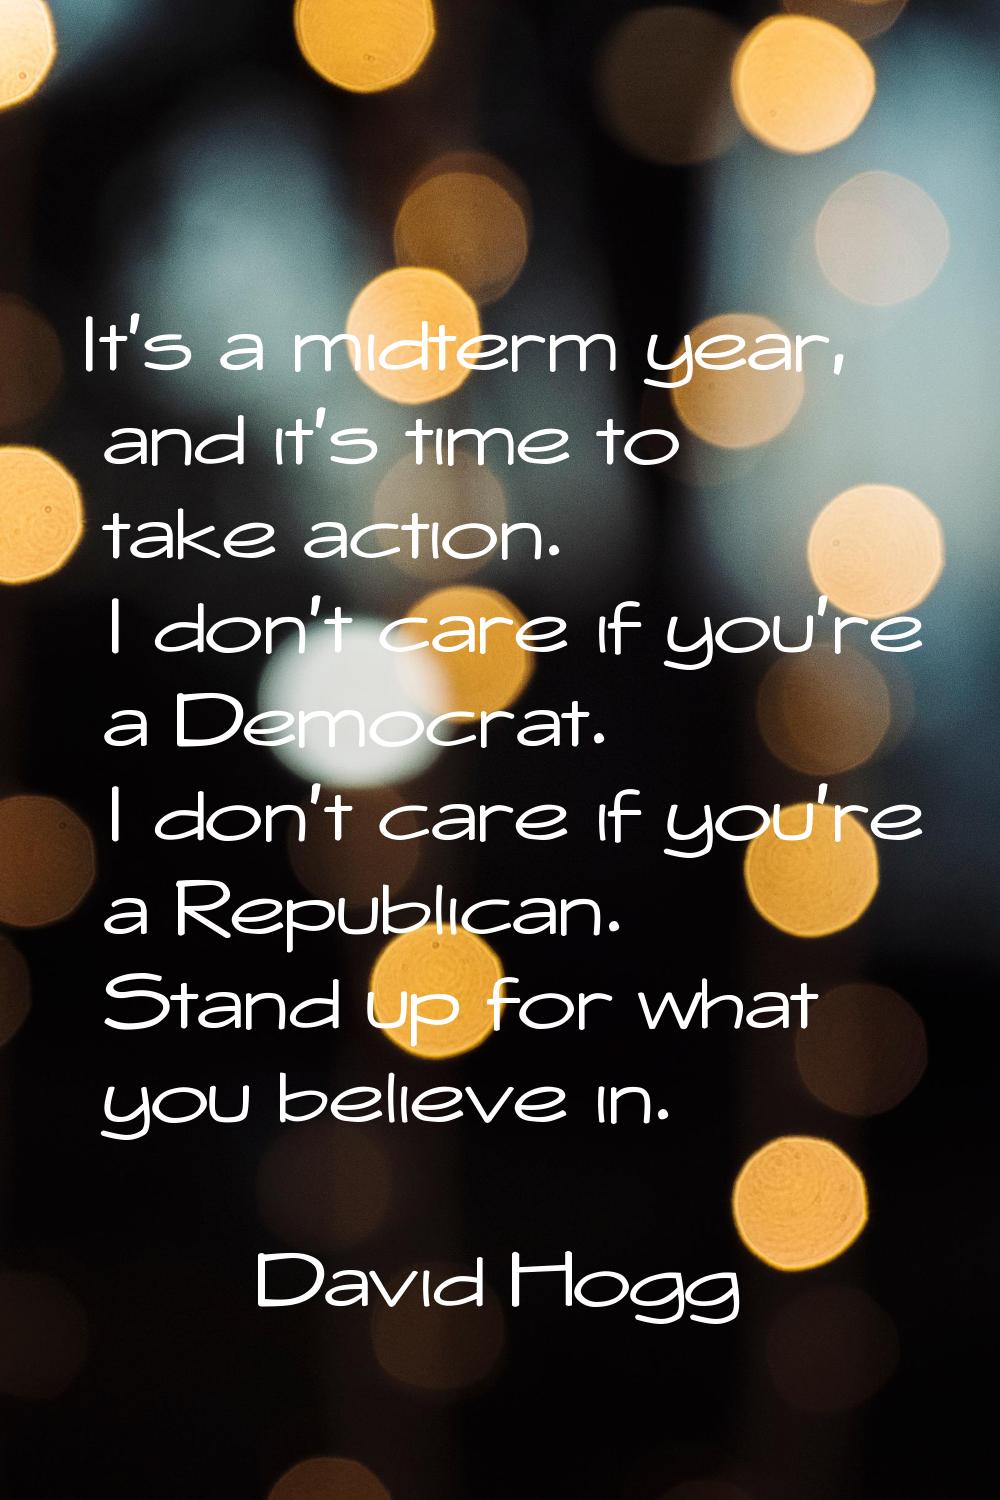 It's a midterm year, and it's time to take action. I don't care if you're a Democrat. I don't care 